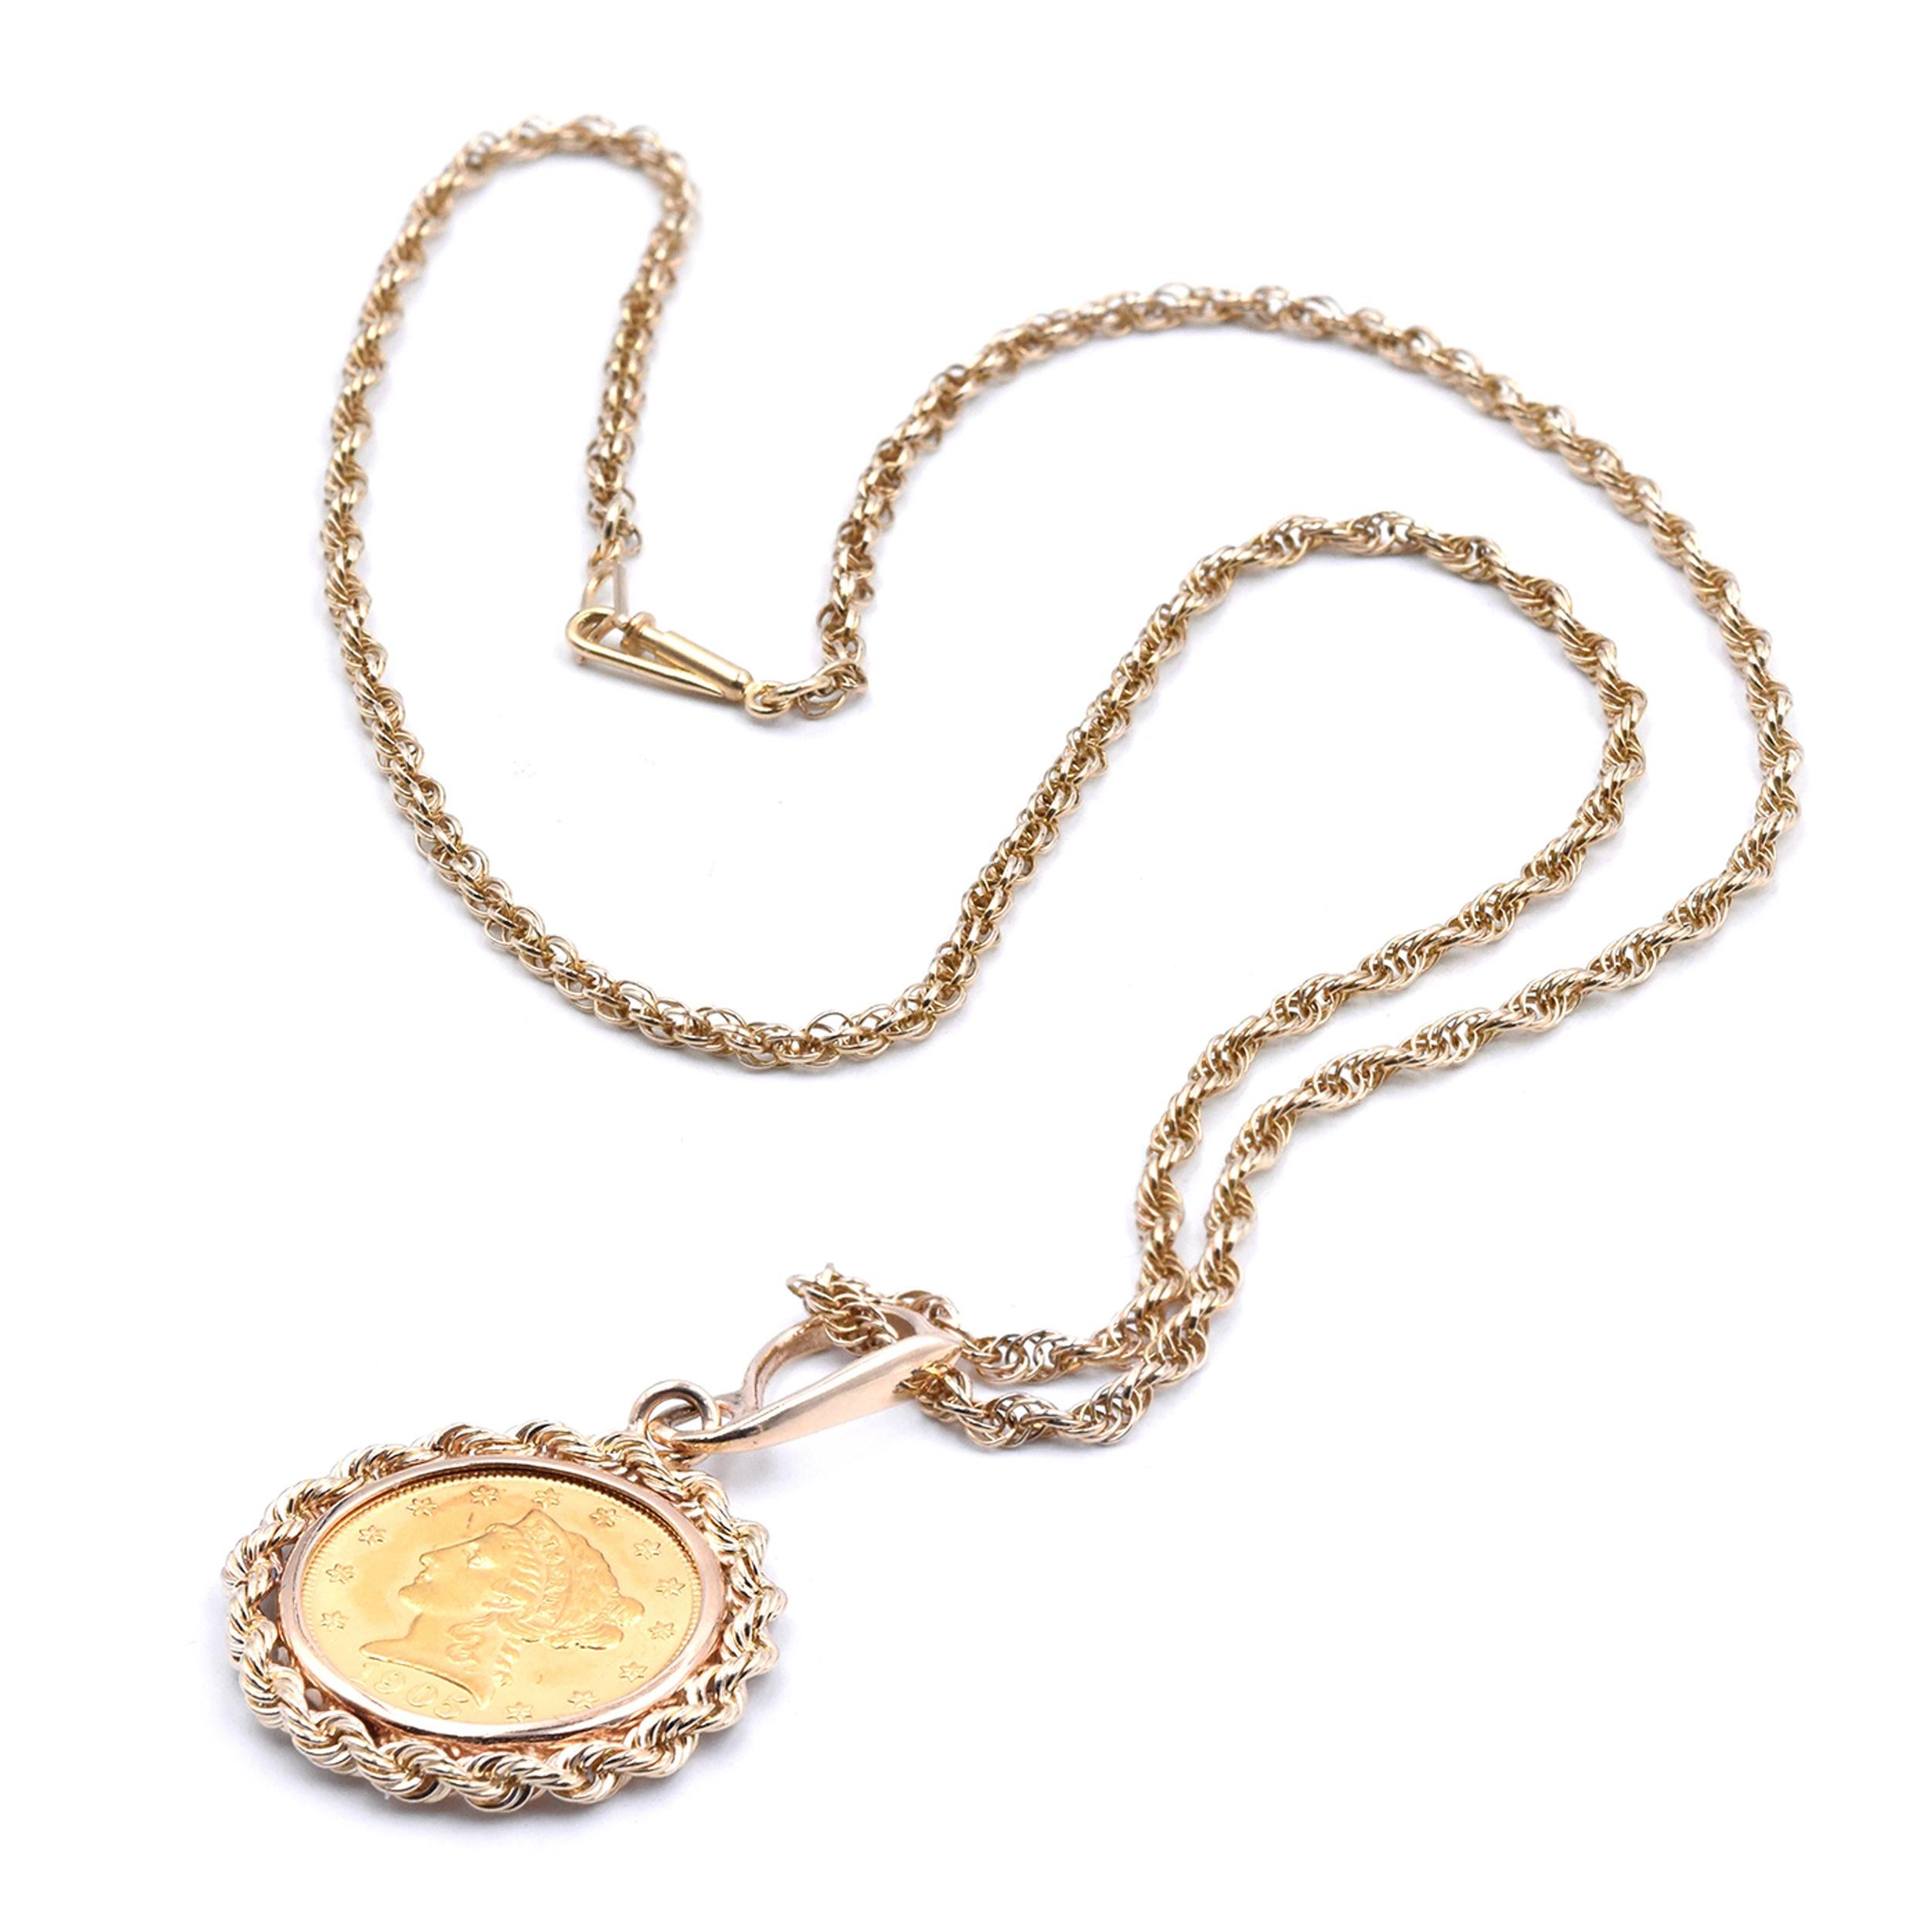 Designer: custom
Material: 14K yellow gold / $2 ½ Liberty Coin
Dimensions: necklace measures 18-inches long
Weight: 11.18 grams
